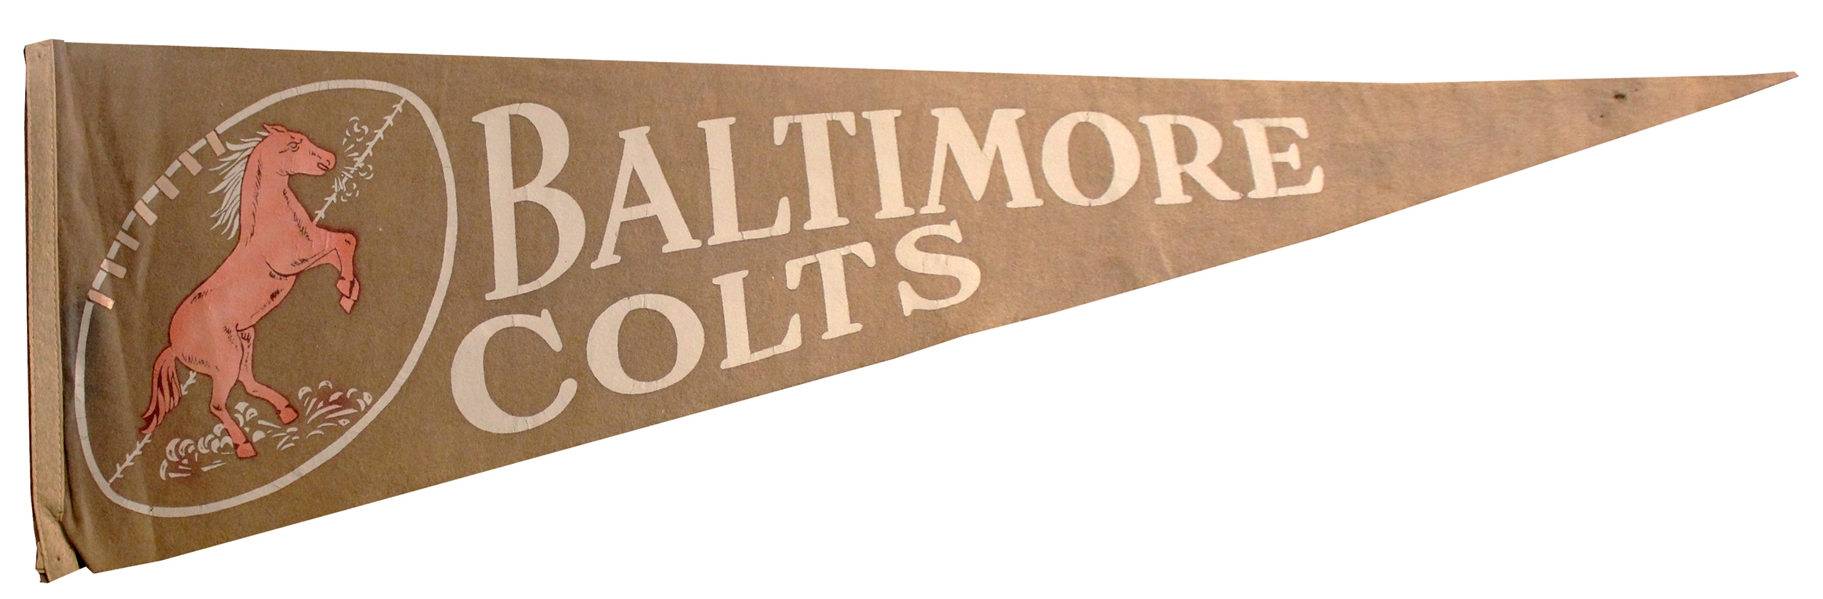 Early Baltimore Colts Pennant Featuring the Horse Mascot -- 29.5'' x 11.5'' -- Pinholes to Corners & Fading -- Very Good